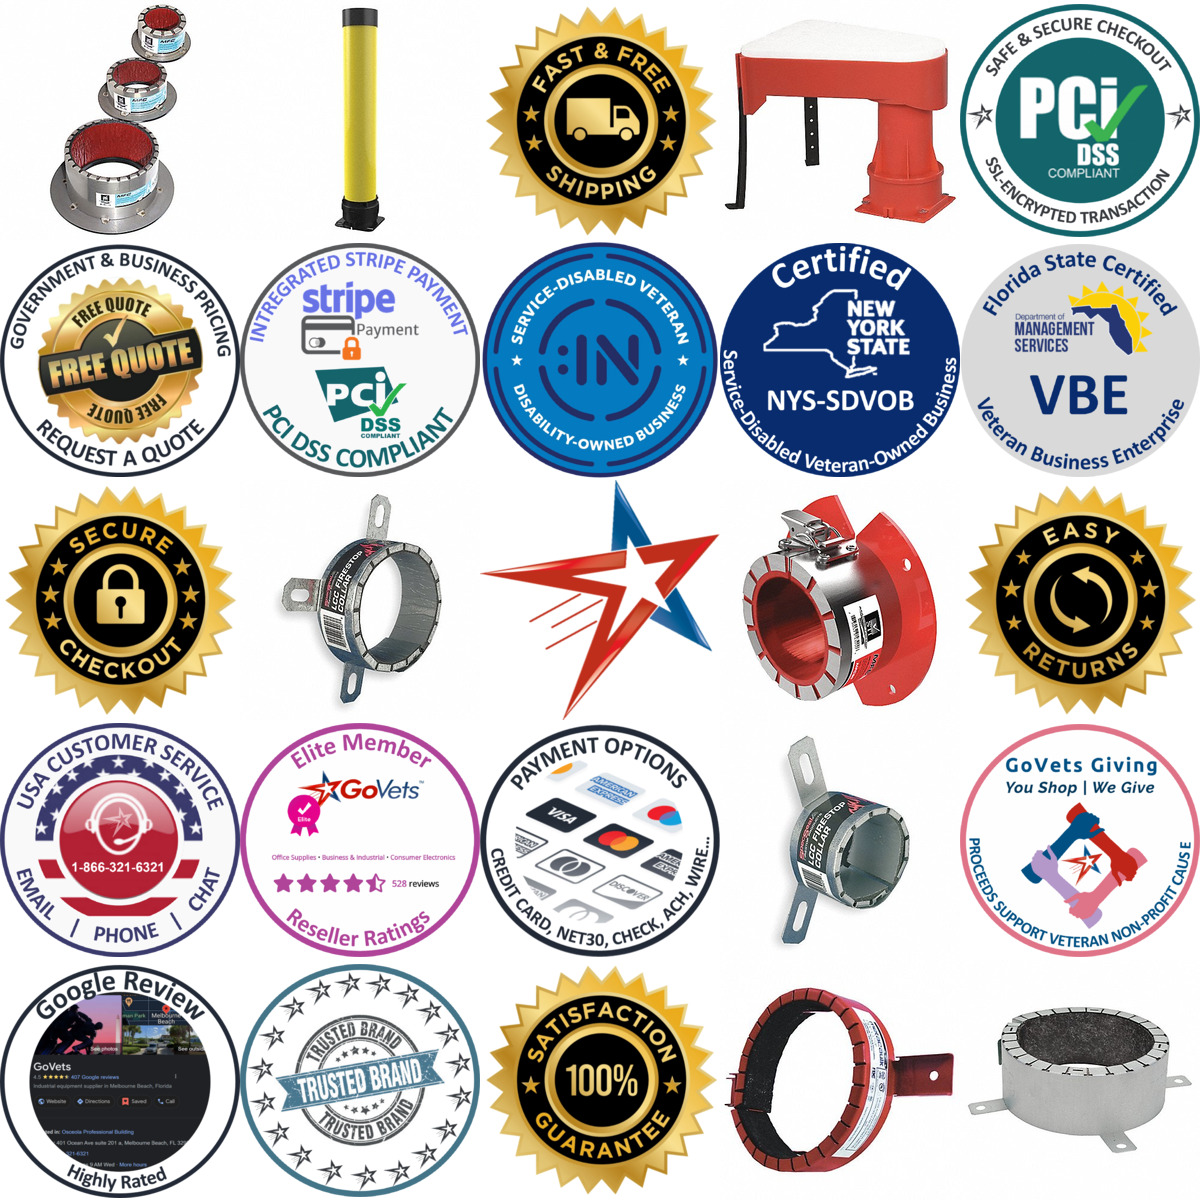 A selection of Firestop Pipe Collars and Cast in Devices products on GoVets